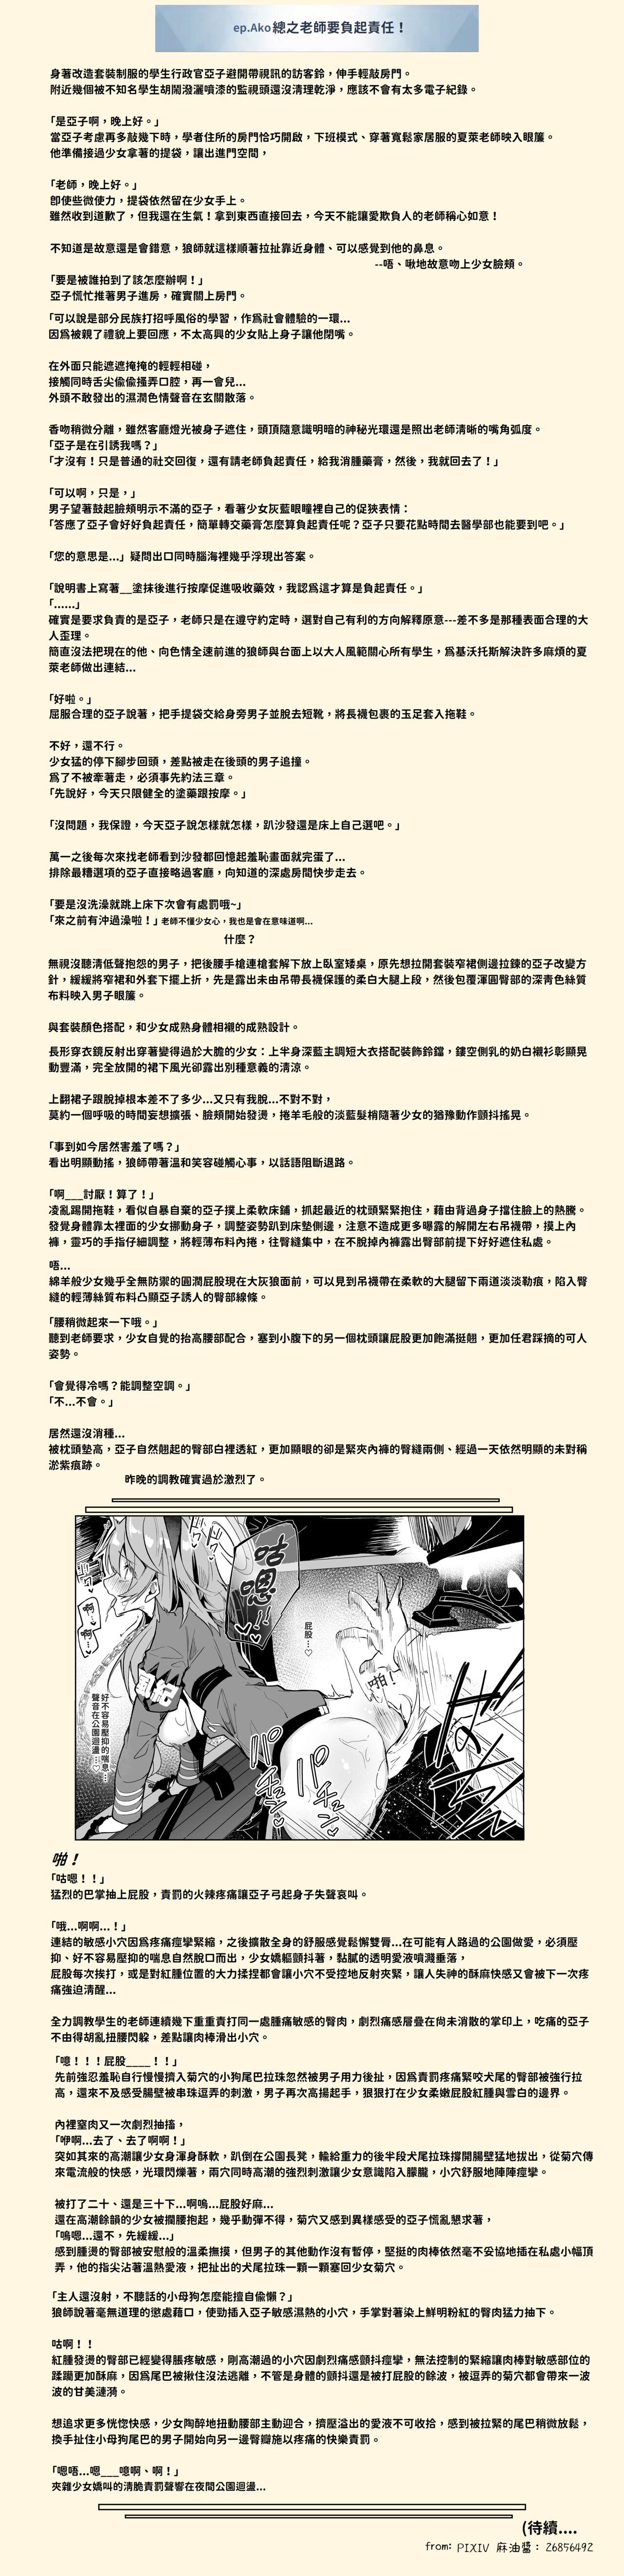 Glasses アコちゃん調教ミニ漫画 - Blue archive Gay Porn - Page 10